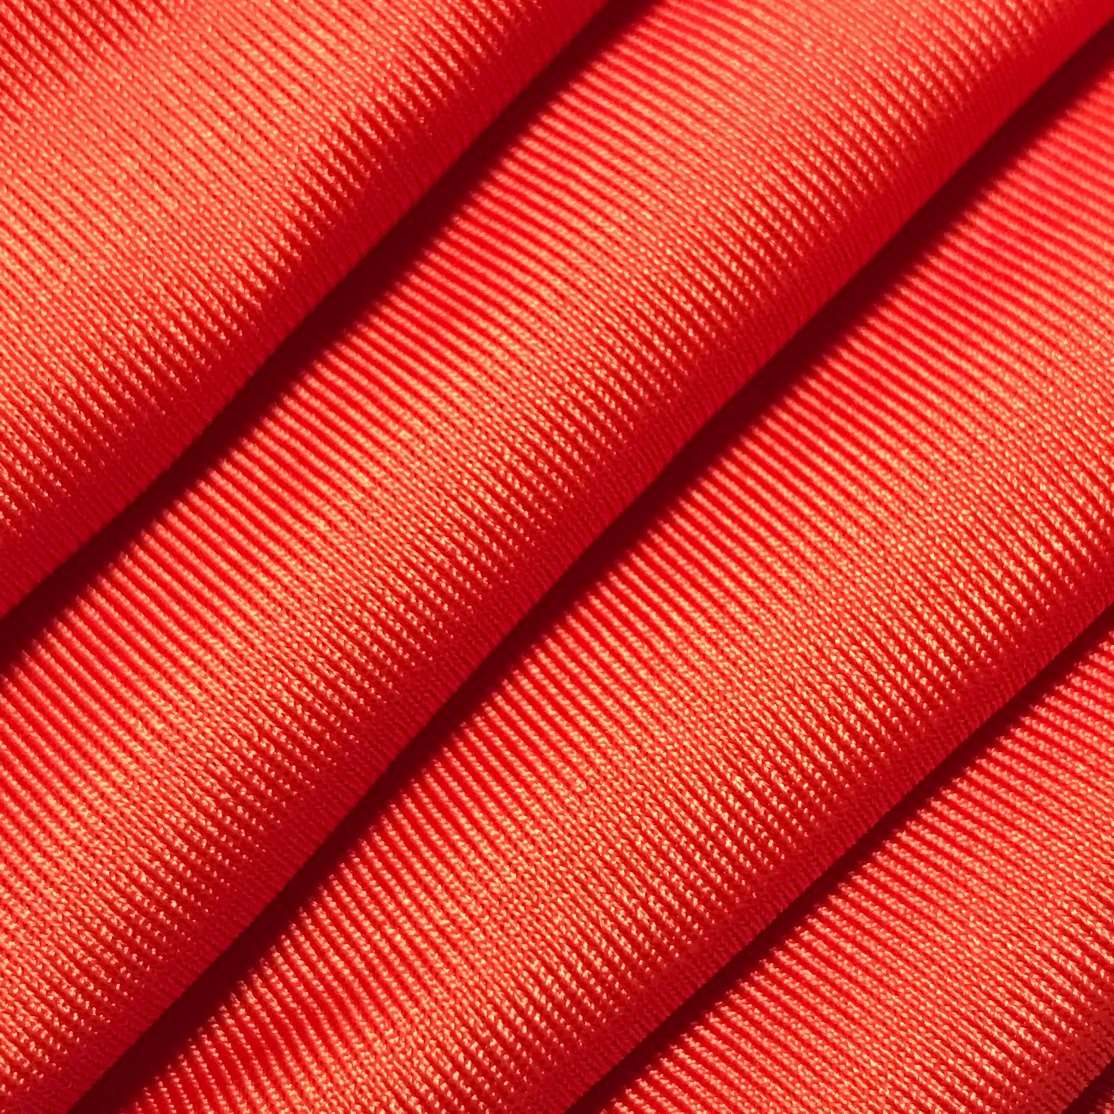 45D Semi-Gloss Polyester Spandex Knitted Fabric for Swimsuit Underwear